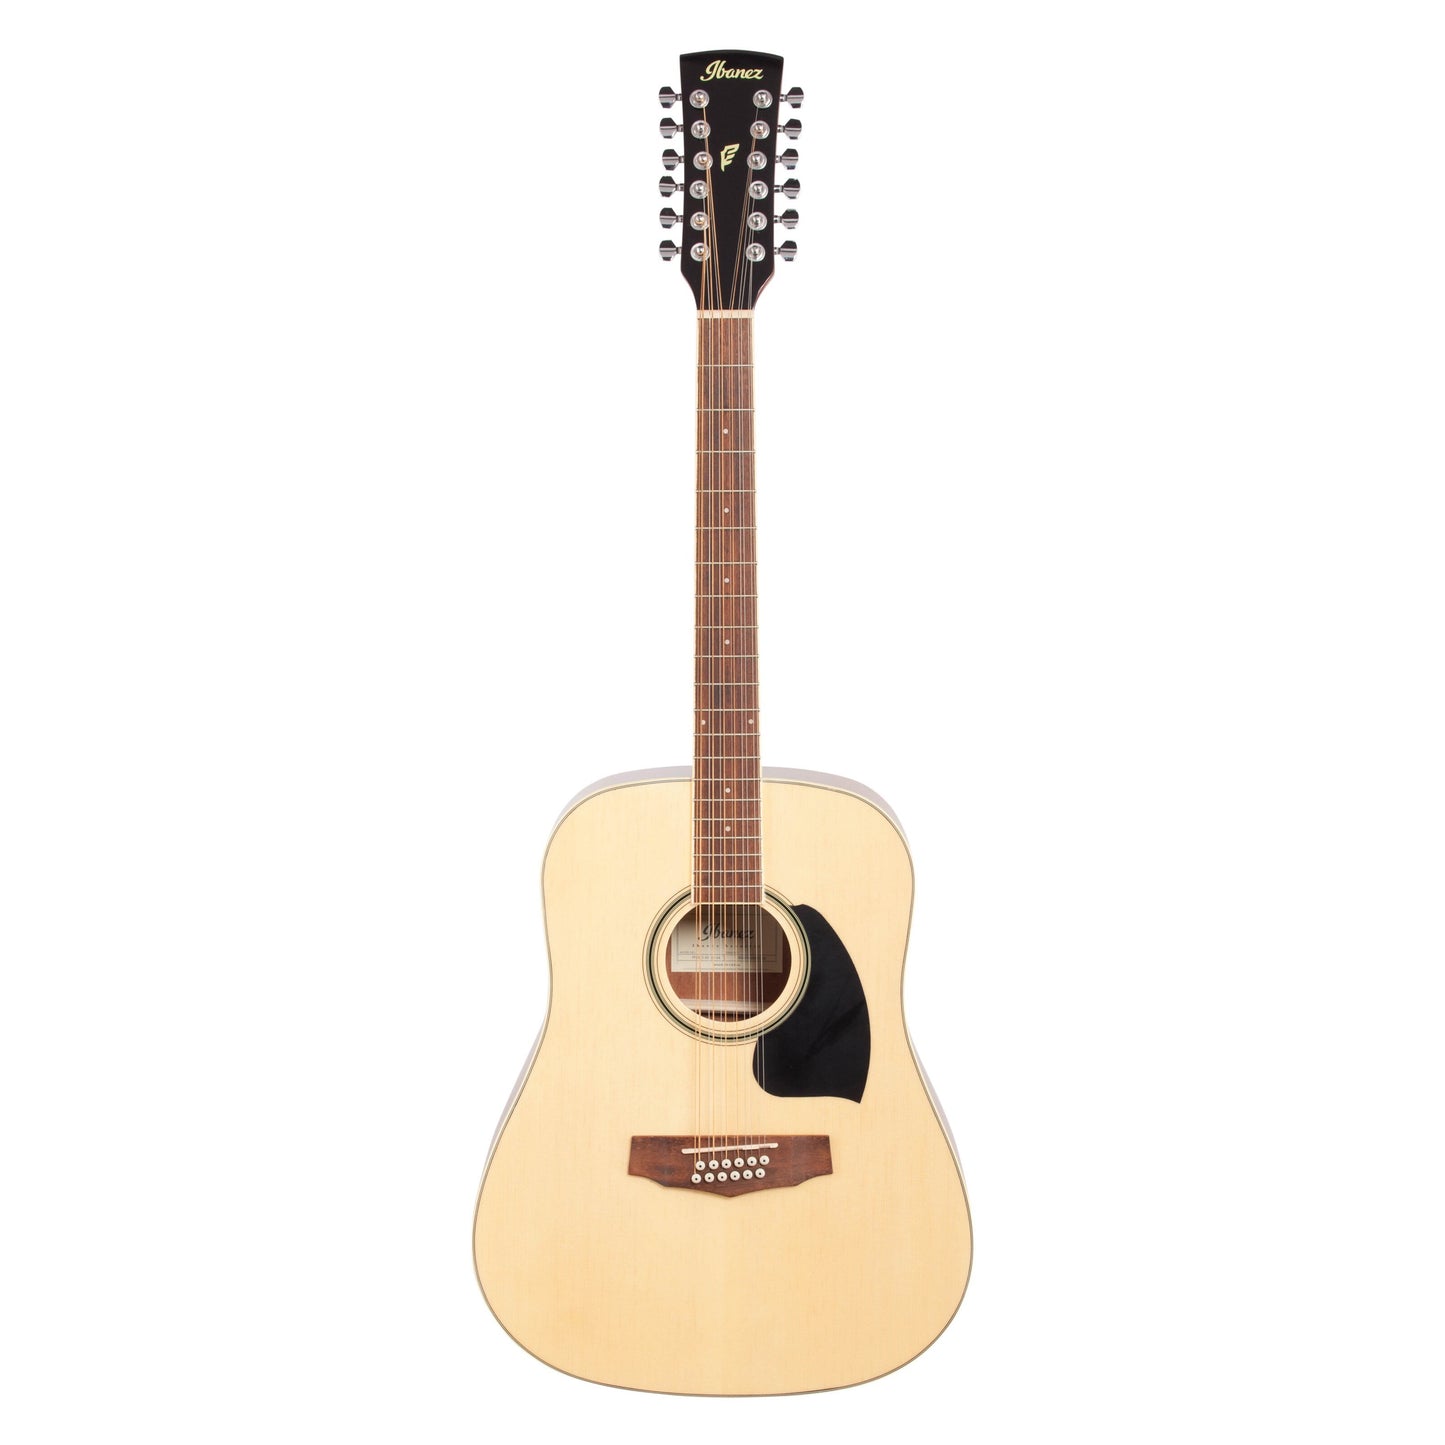 Ibanez PF1512 Dreadnought Acoustic Guitar, 12-String, Natural